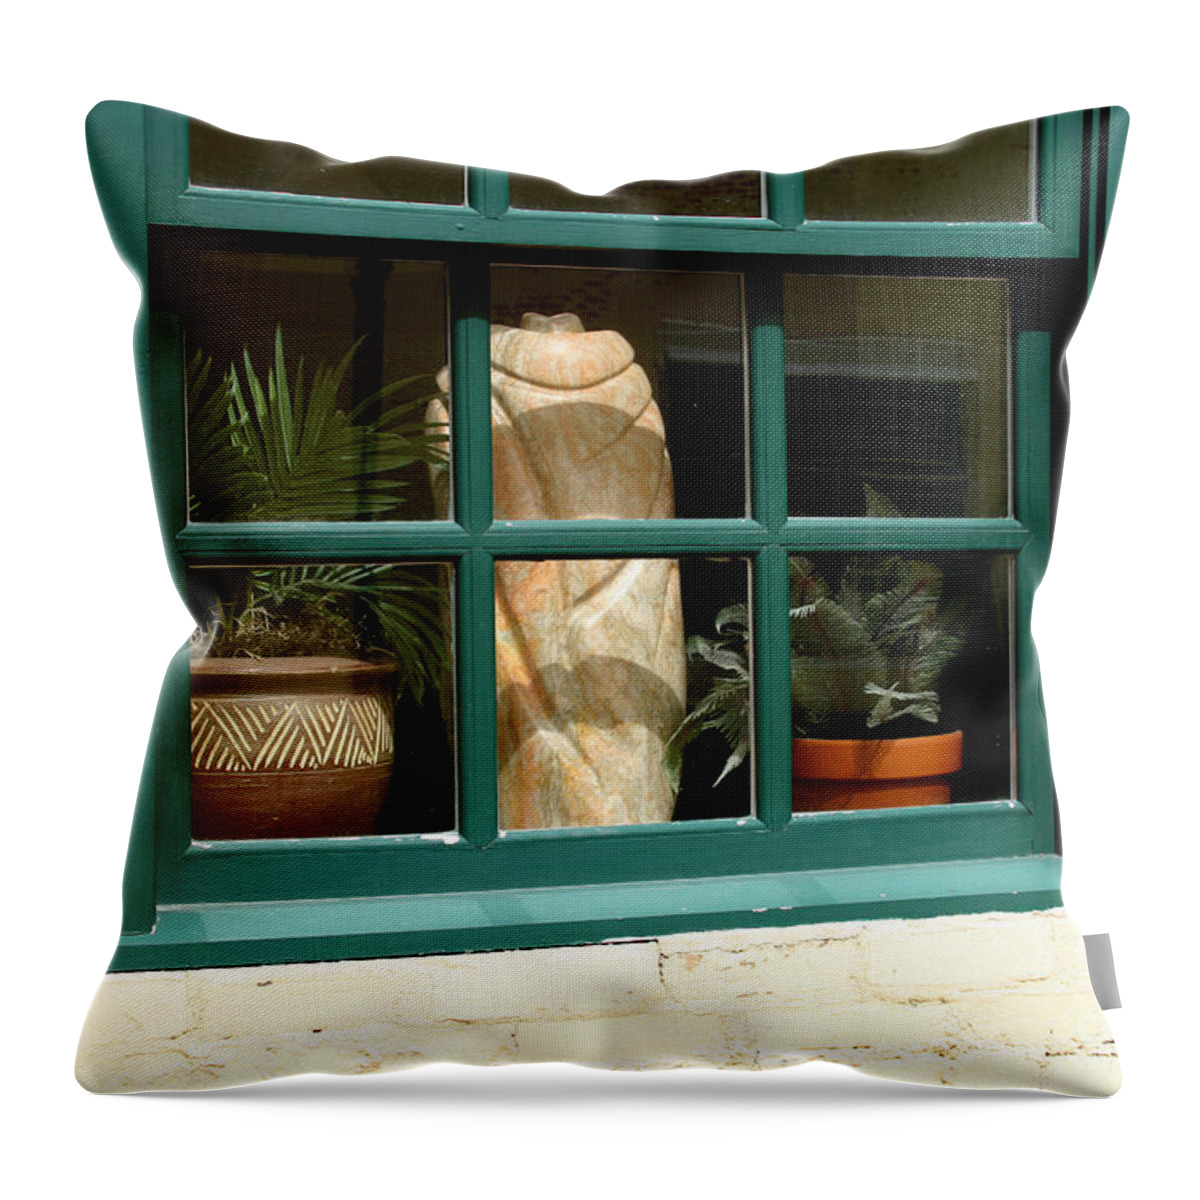 Fern Throw Pillow featuring the photograph Window at Sanders Resturant by Steve Augustin